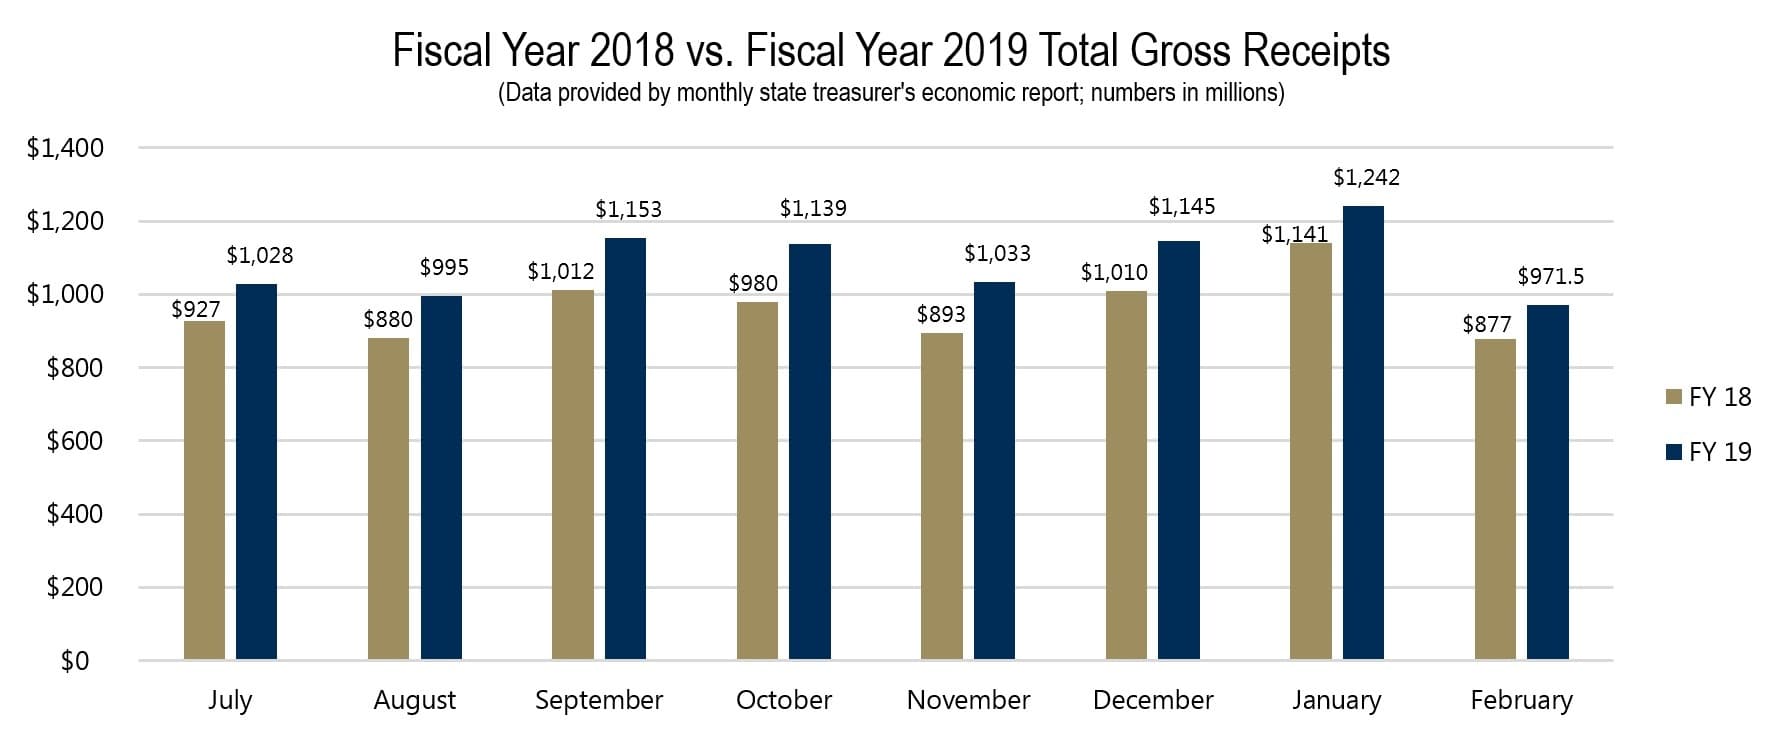 Fiscal Year 2018 vs. Fiscal Year 2019 Total Gross Receipts